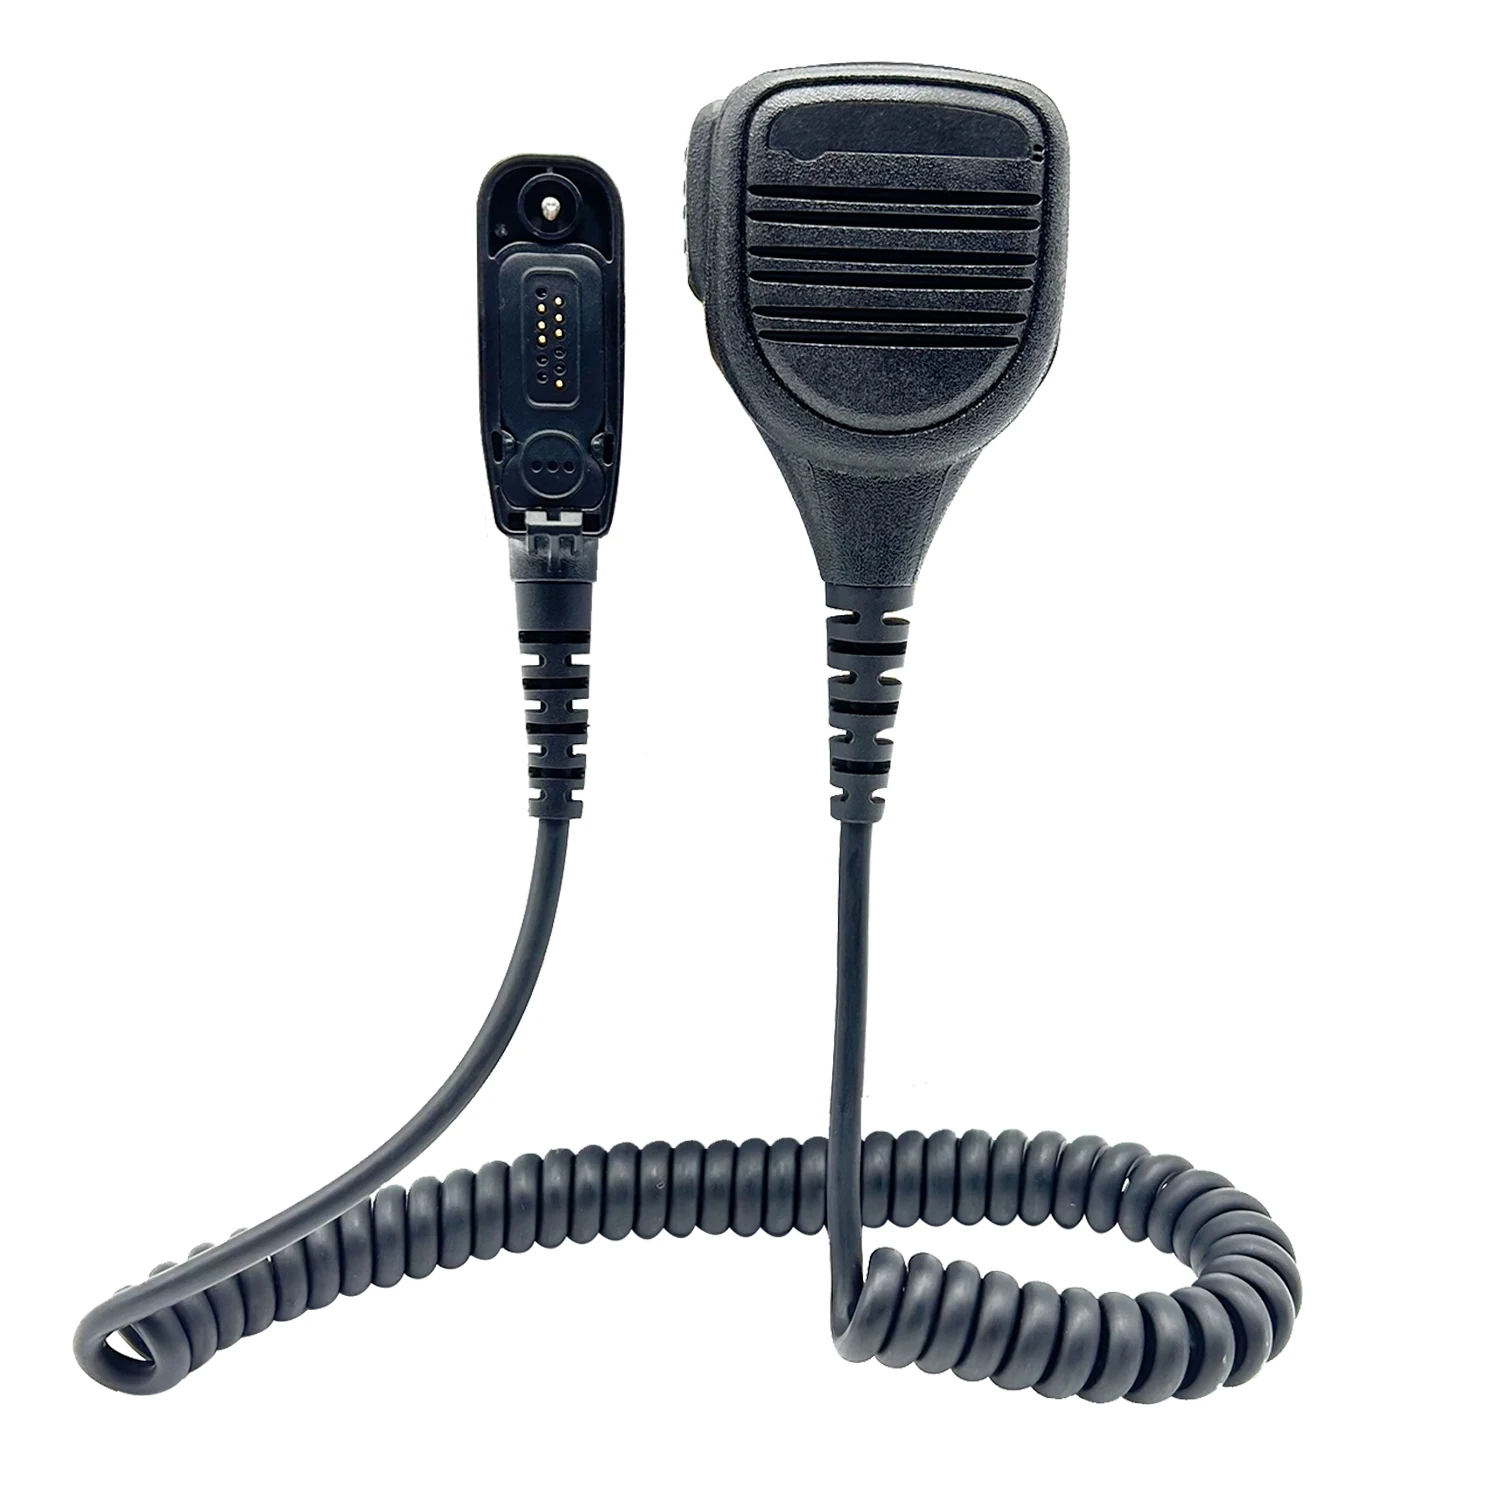 Walkie Talkie Remote Speaker Microphone Mic For XPR6350 XPR6550 XPR7550 APX7000 DP3400 DP3401 Handheld Radio